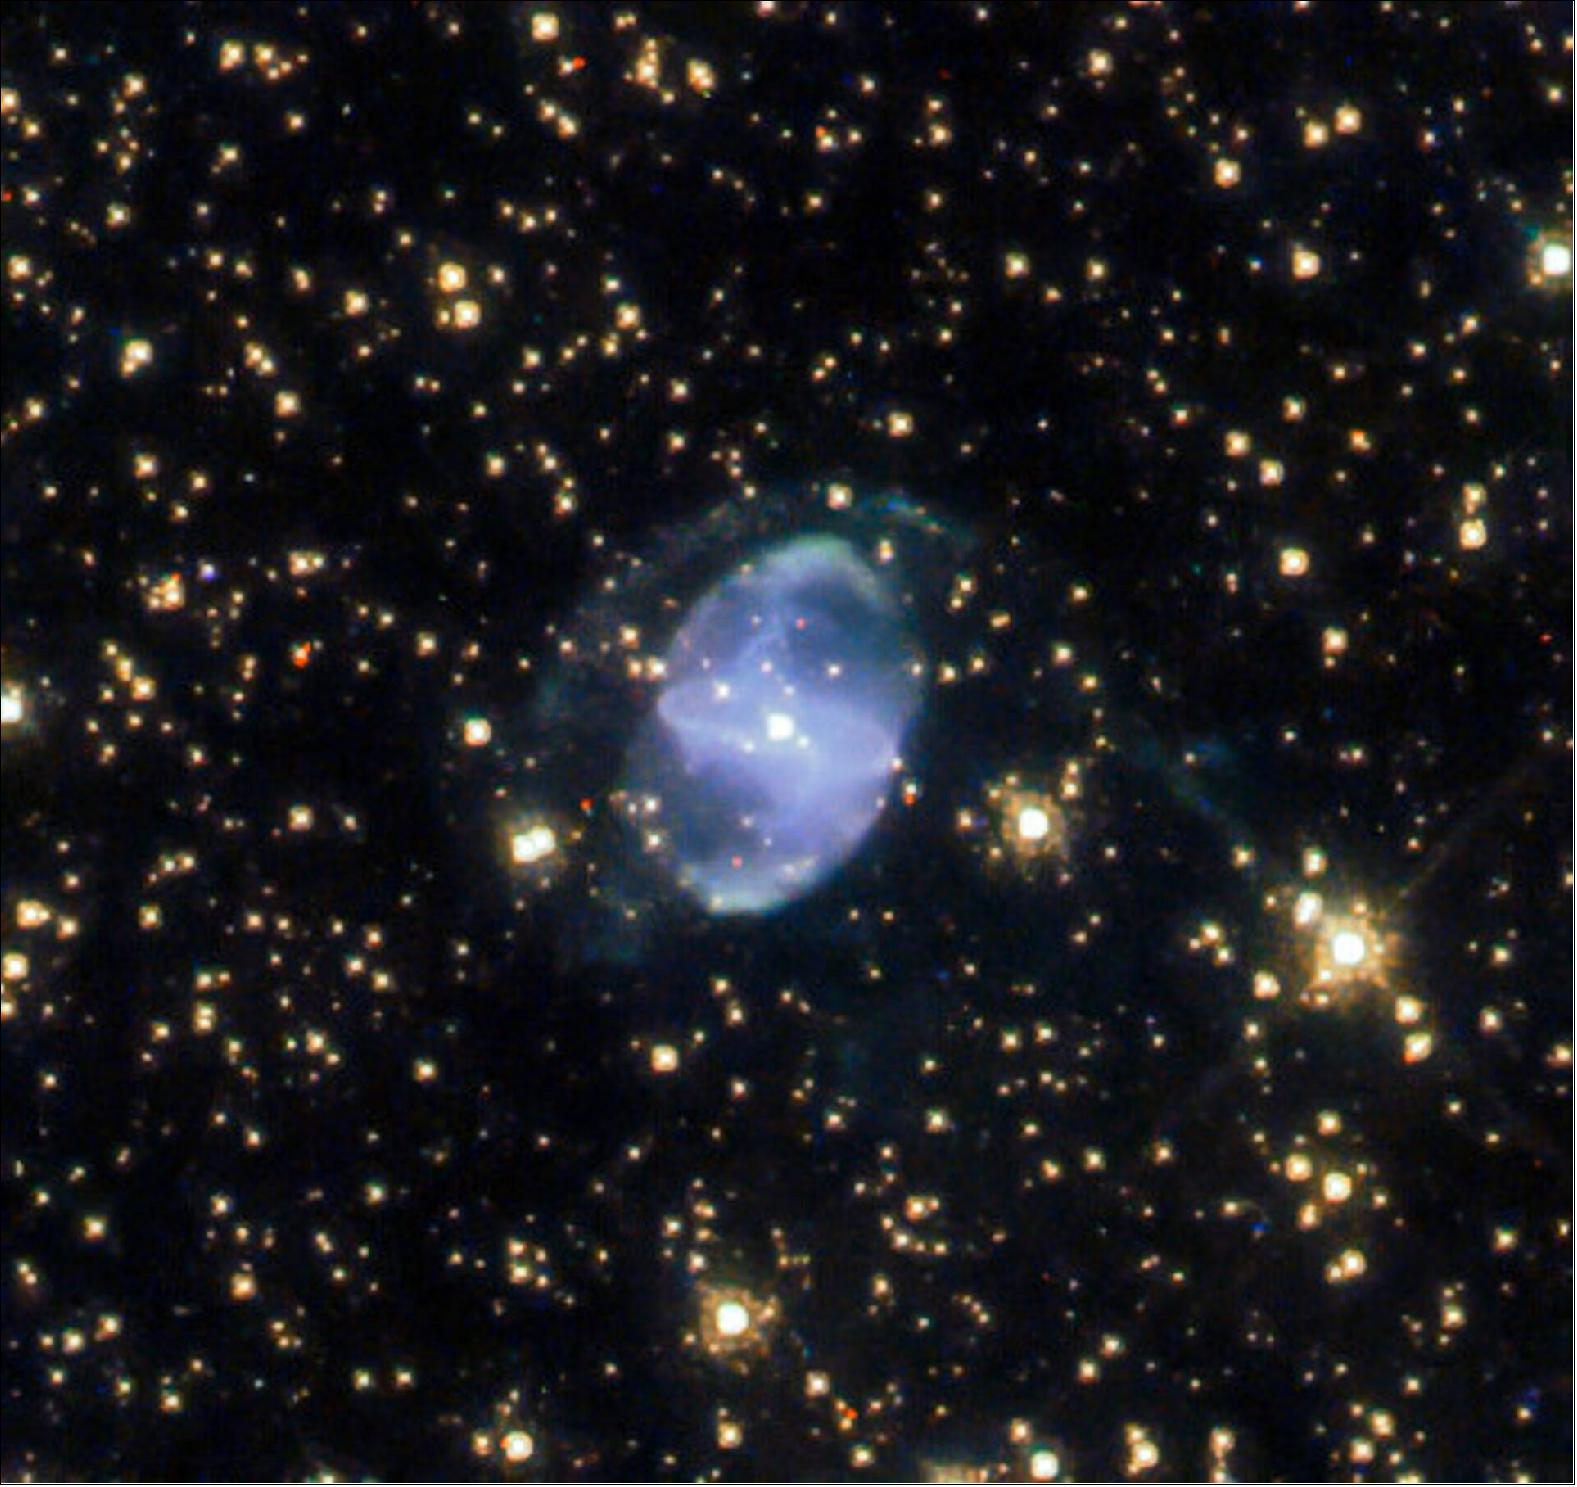 Figure 119: Image of the week. The interstellar medium is the material — consisting of matter and radiation — between star systems and galaxies. The star at the centre of ESO 455-10 allows Hubble to see the interaction with the gas and dust of the nebula, the surrounding interstellar medium, and the light from the star itself. Planetary nebulae are thought to be crucial in galactic enrichment as they distribute their elements, particularly the heavier metal elements produced inside a star, into the interstellar medium which will in time form the next generation of stars (image credit: ESA/Hubble & NASA, L. Stanghellini; CC BY 4.0)